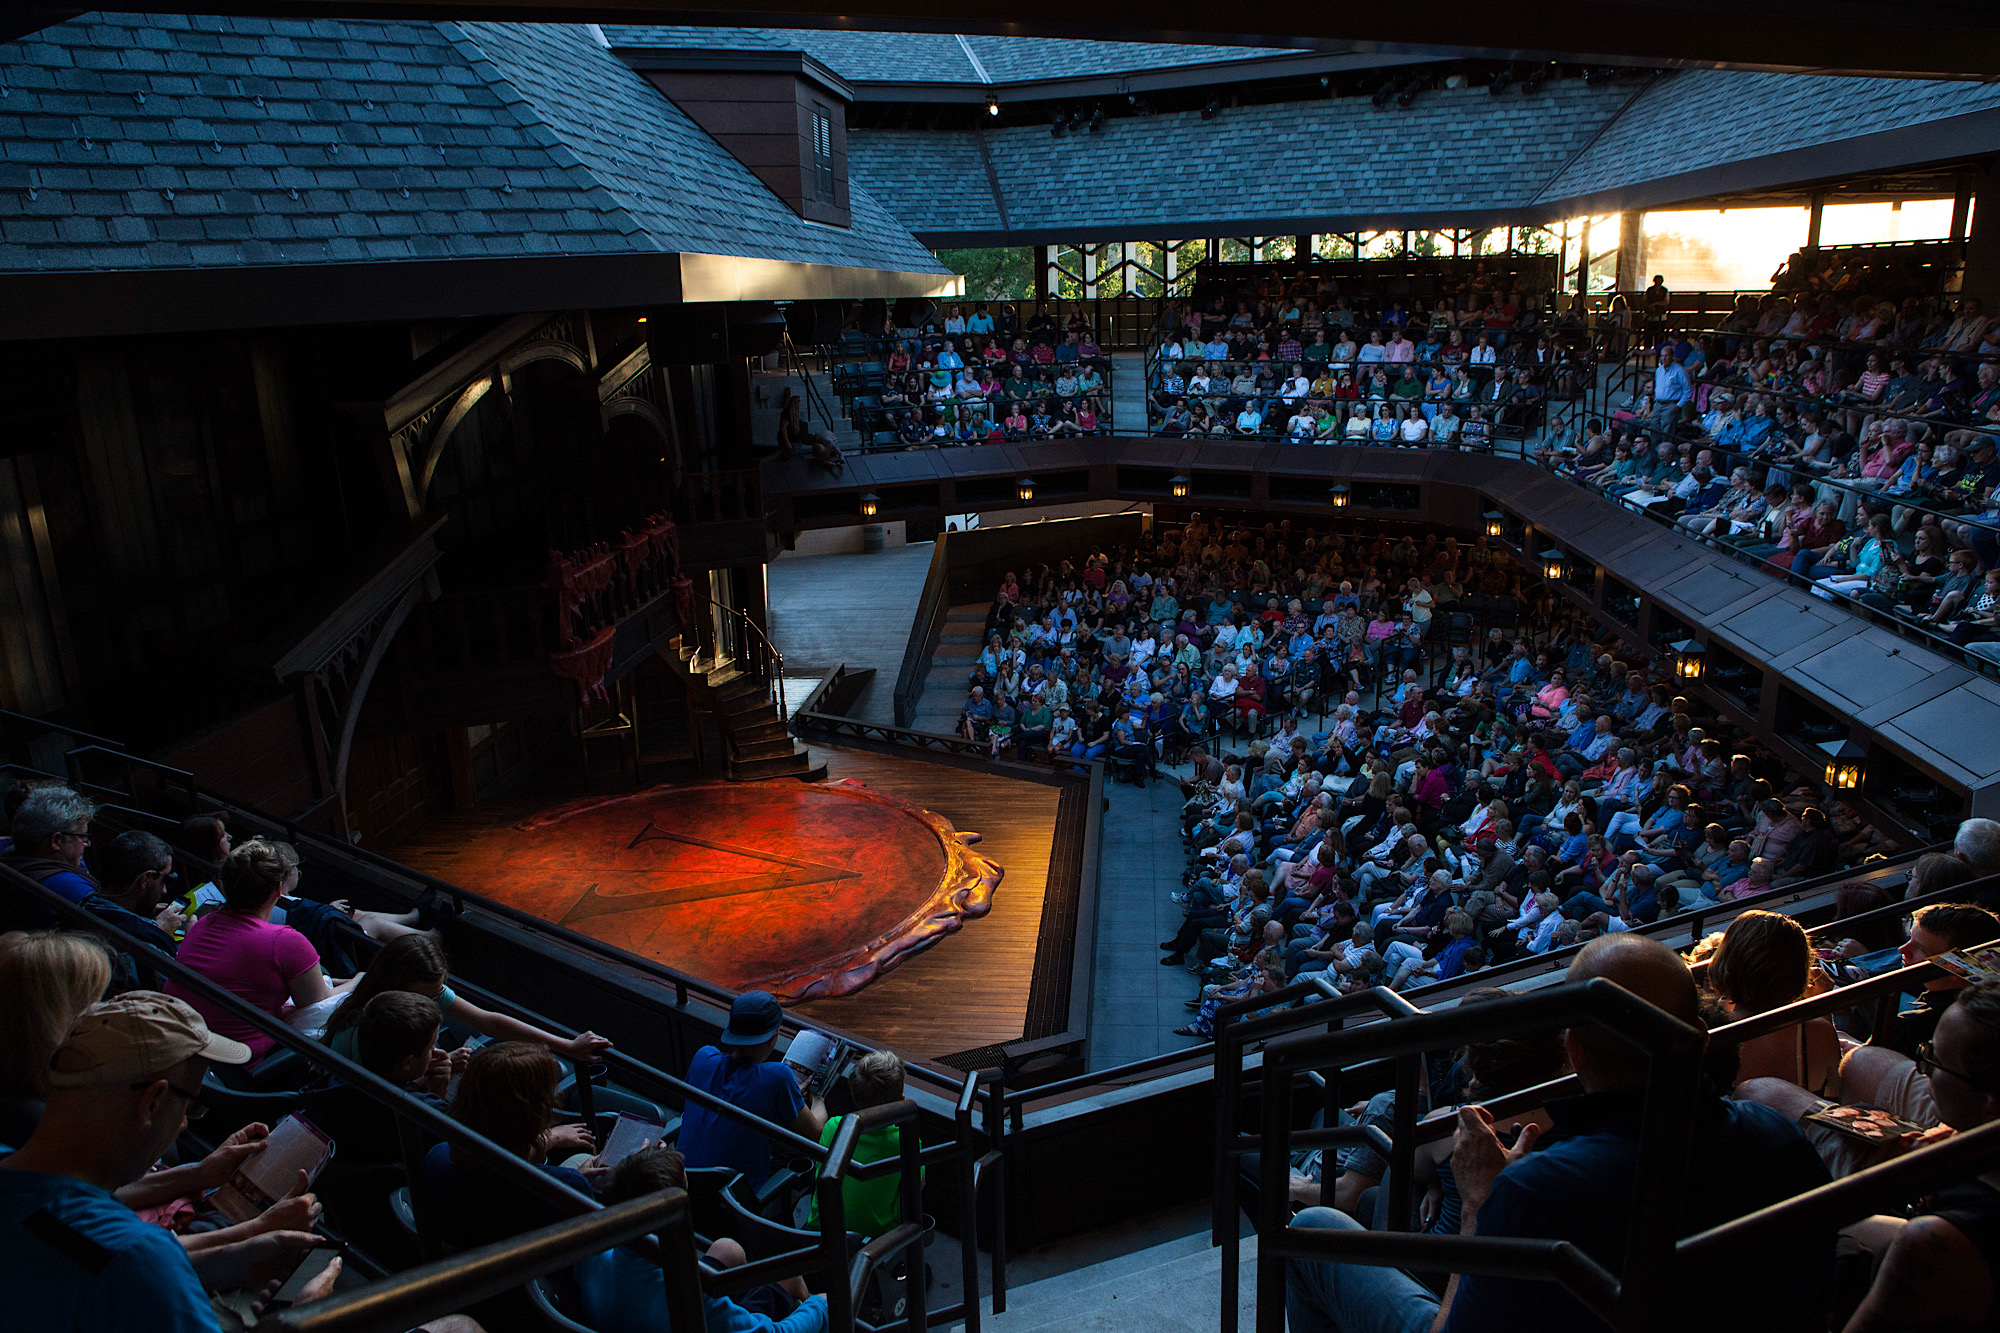 Utah Shakespeare Festival offers Cyber Monday ticket discounts ahead of